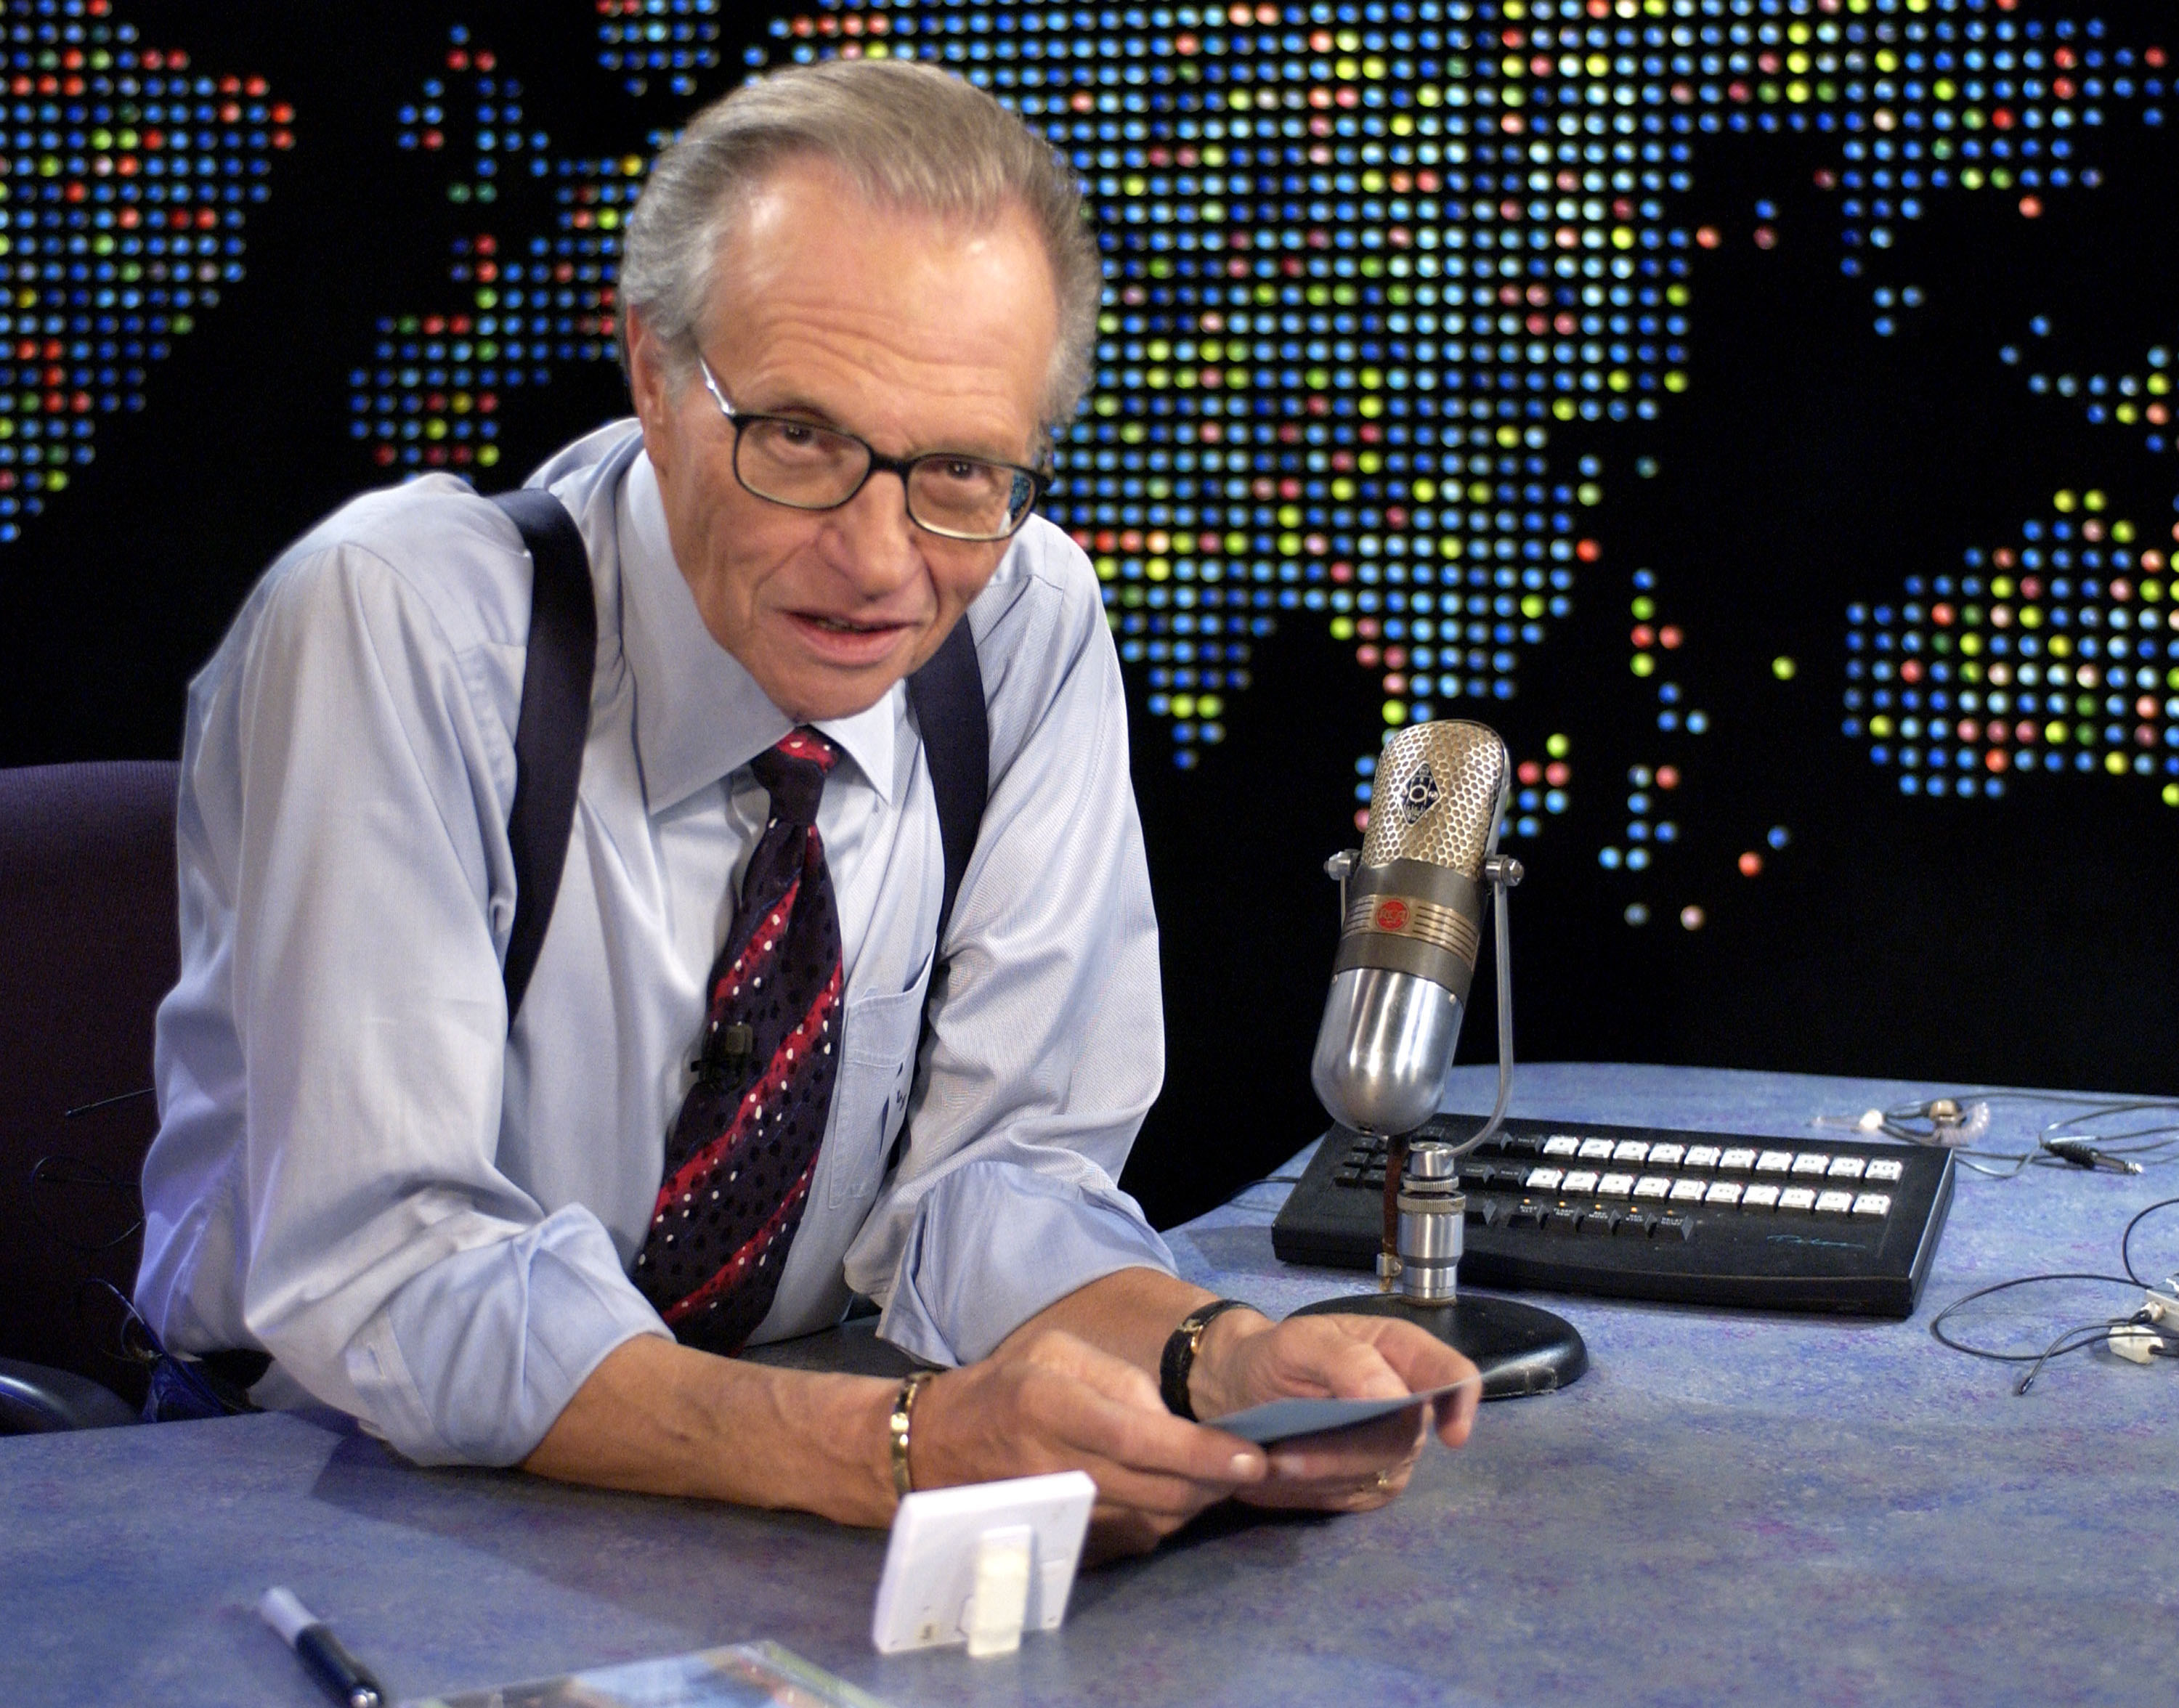 Larry King at his desk holding a piece of paper and talking into his microphone